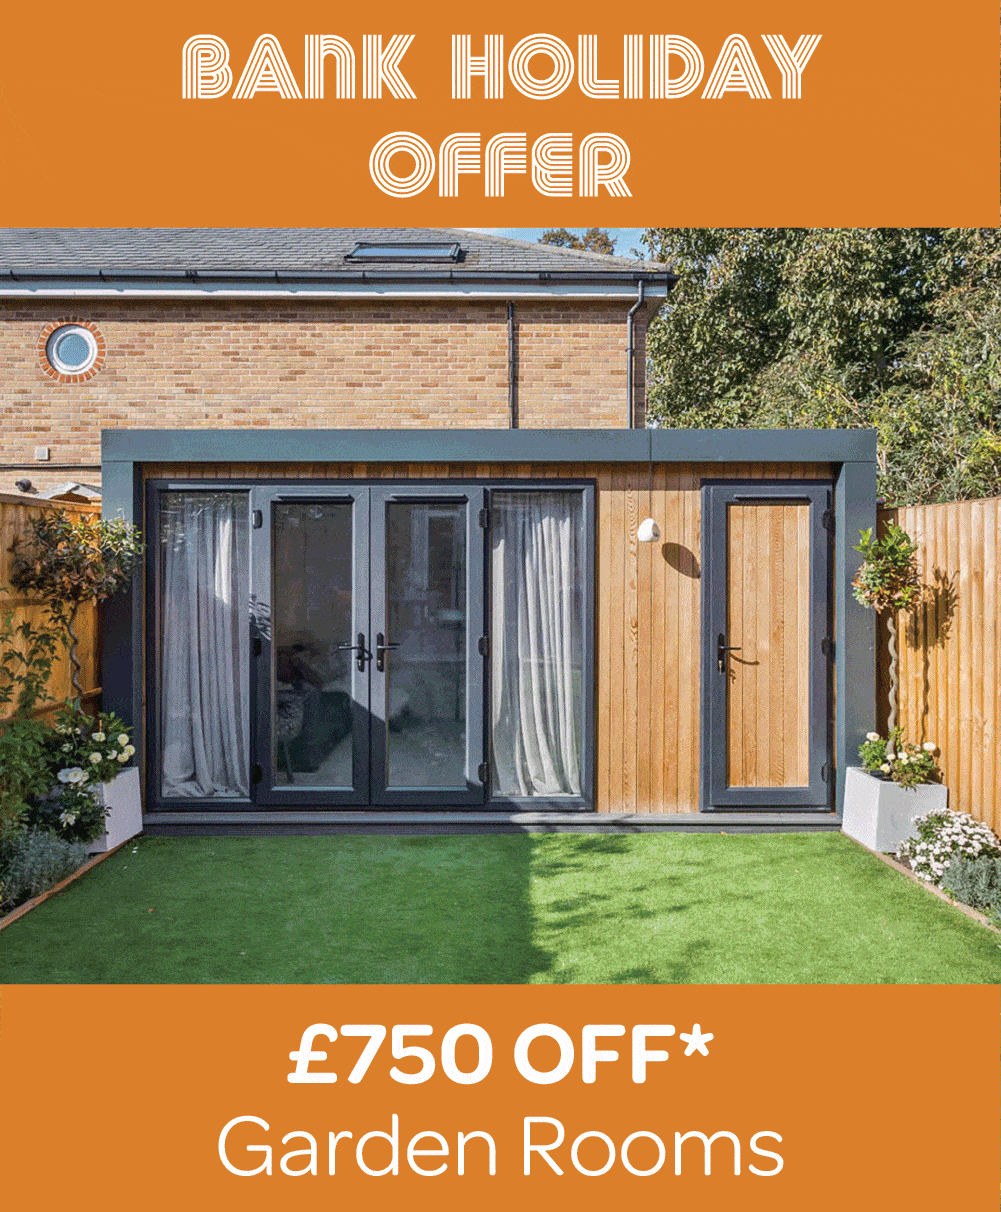 Bank holiday promotion showing a £750 discount on garden rooms, garden offices, garden gyms and garden bars.